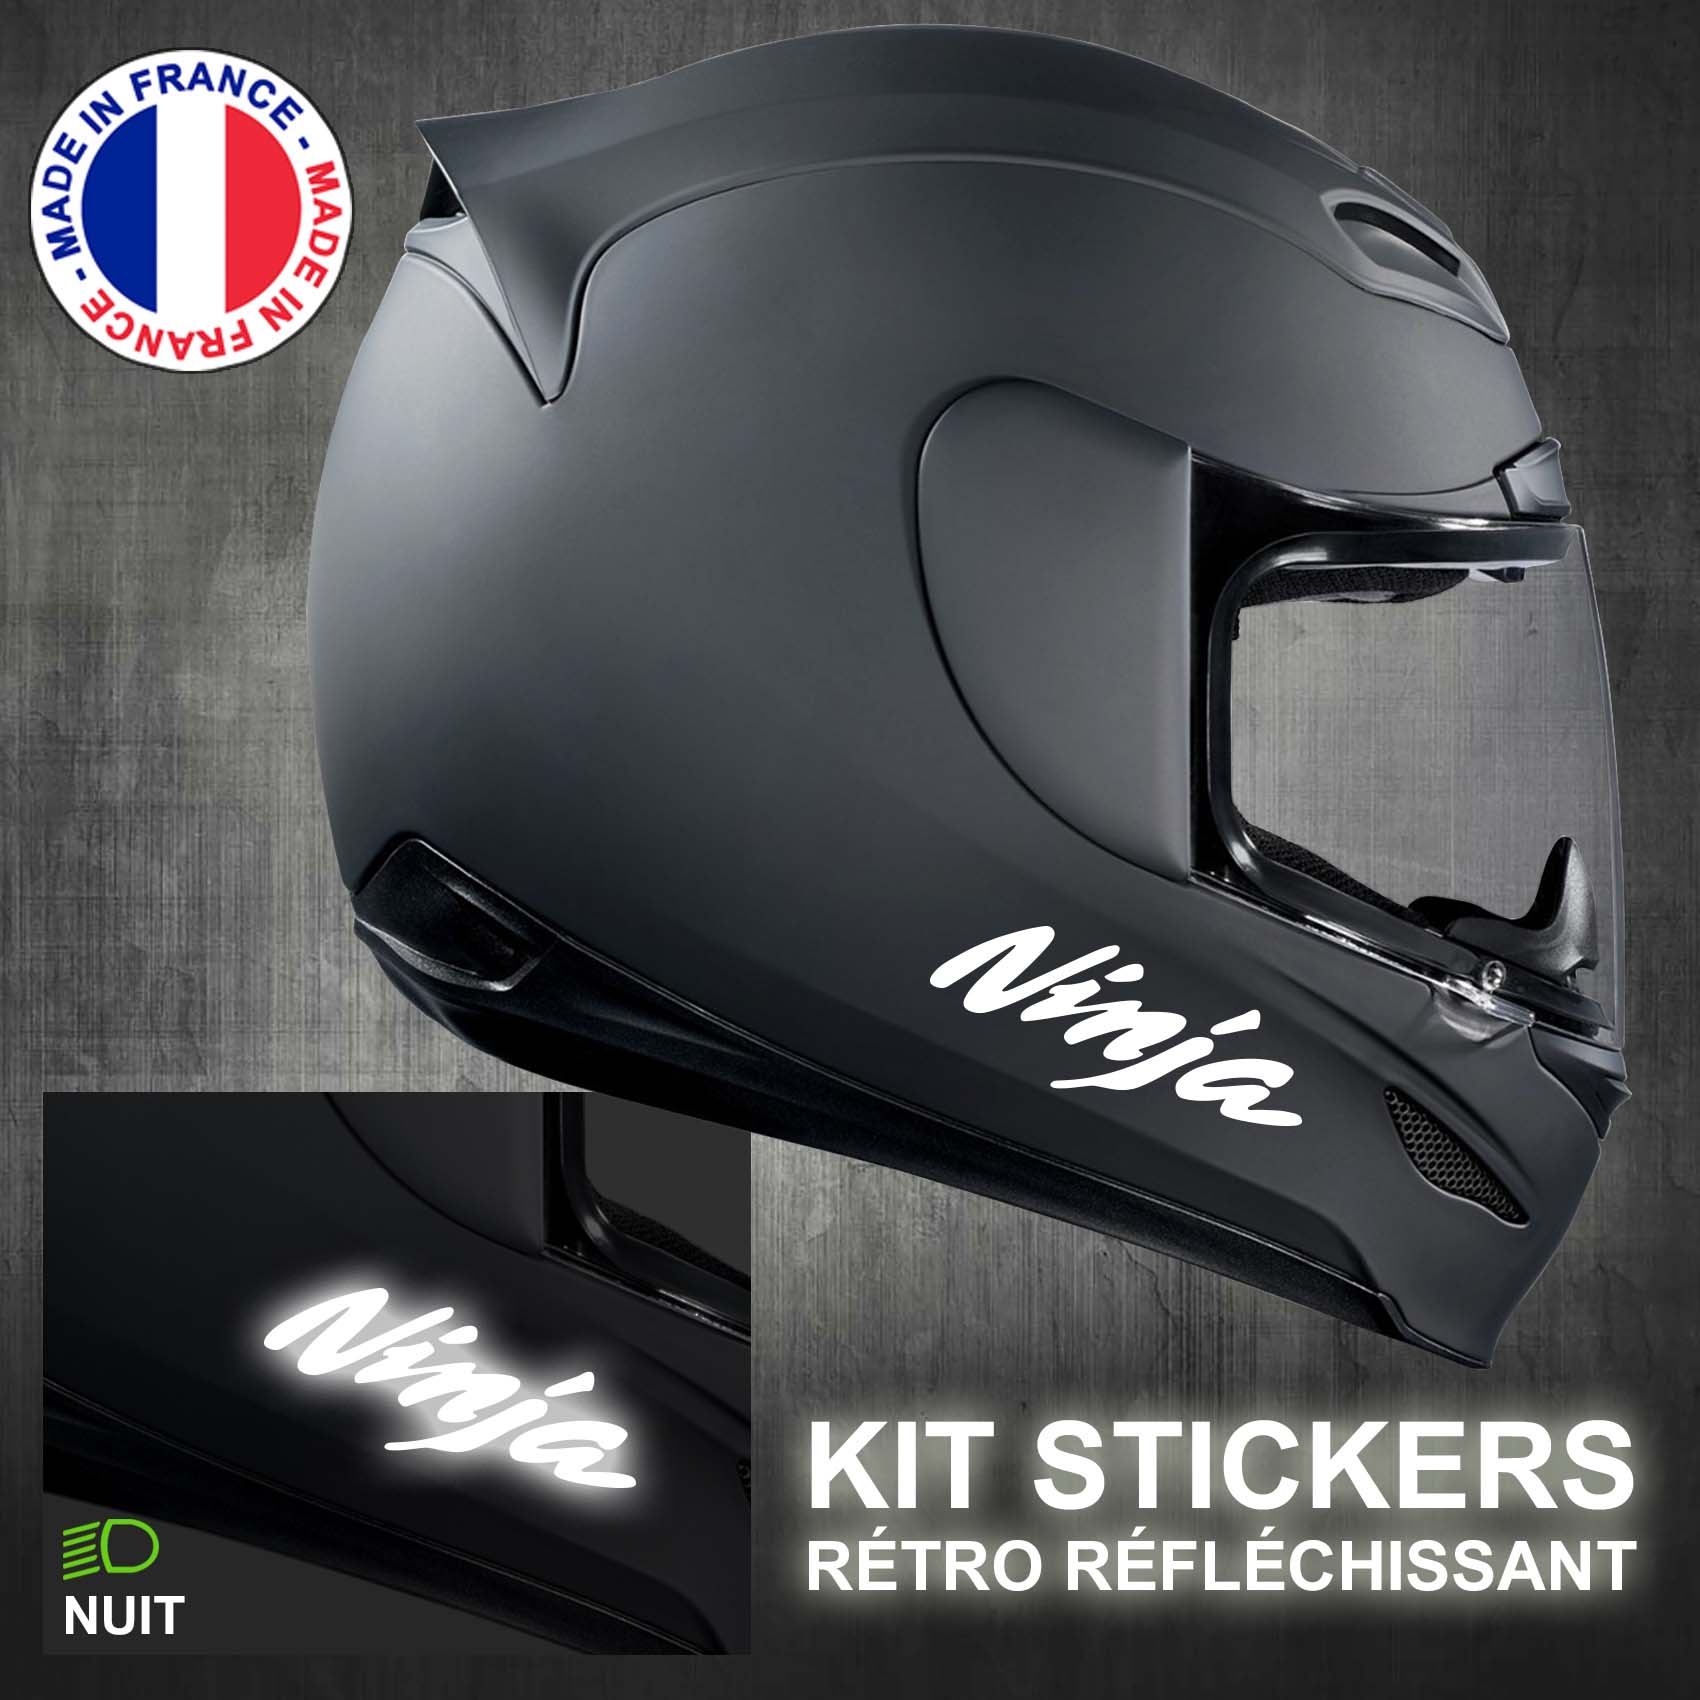 stickers-casque-moto-ninja-kawasaki-ref1-retro-reflechissant-autocollant-noir-moto-velo-tuning-racing-route-sticker-casques-adhesif-scooter-nuit-securite-decals-personnalise-personnalisable-min